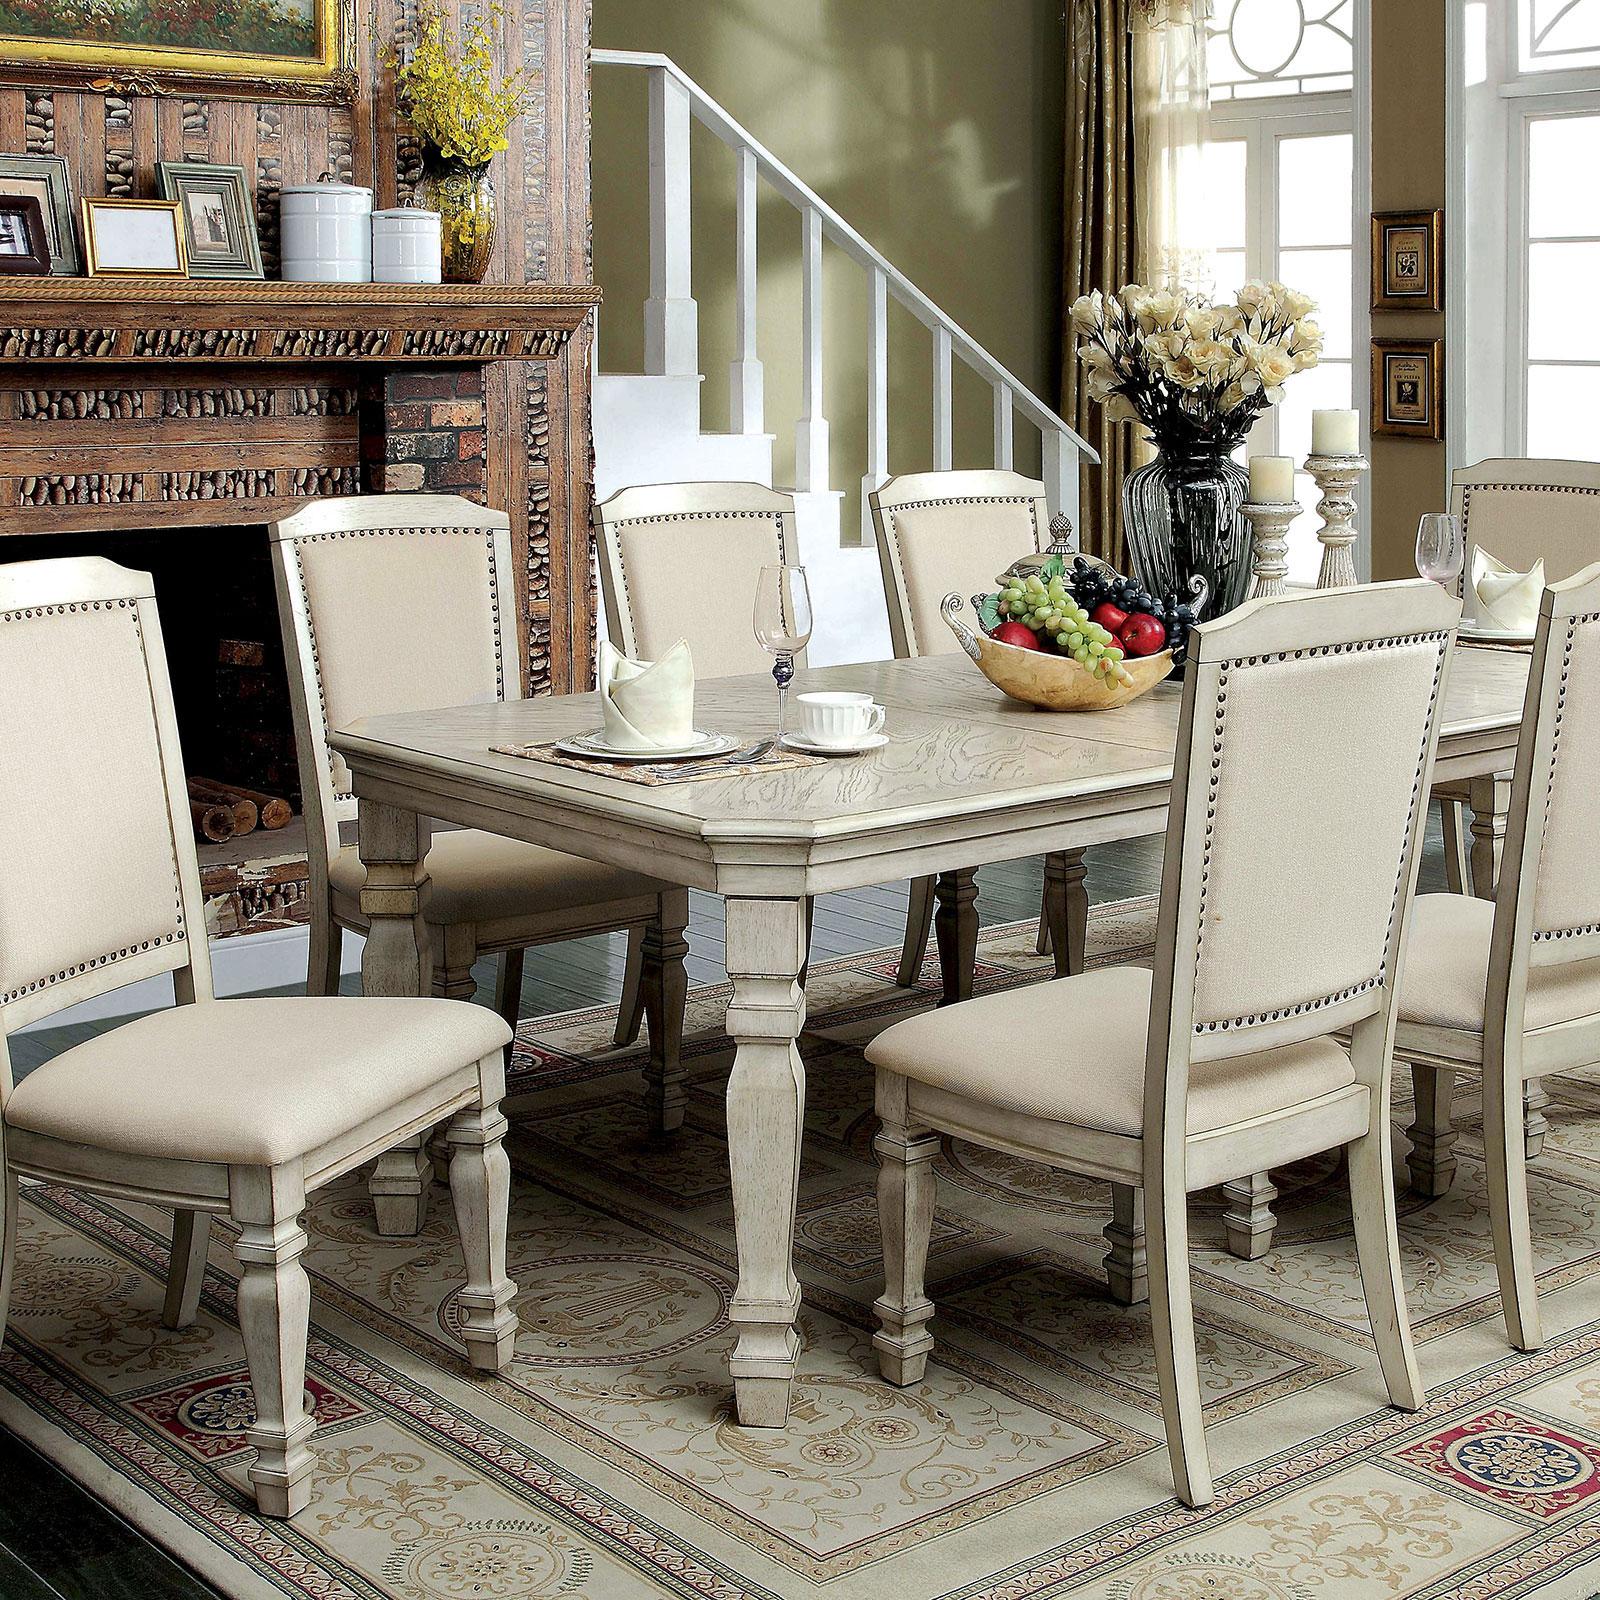 Transitional Dining Table Set HOLCROFT CM3600T-Set-7 CM3600T-Set-7 in Antique White, Ivory Fabric